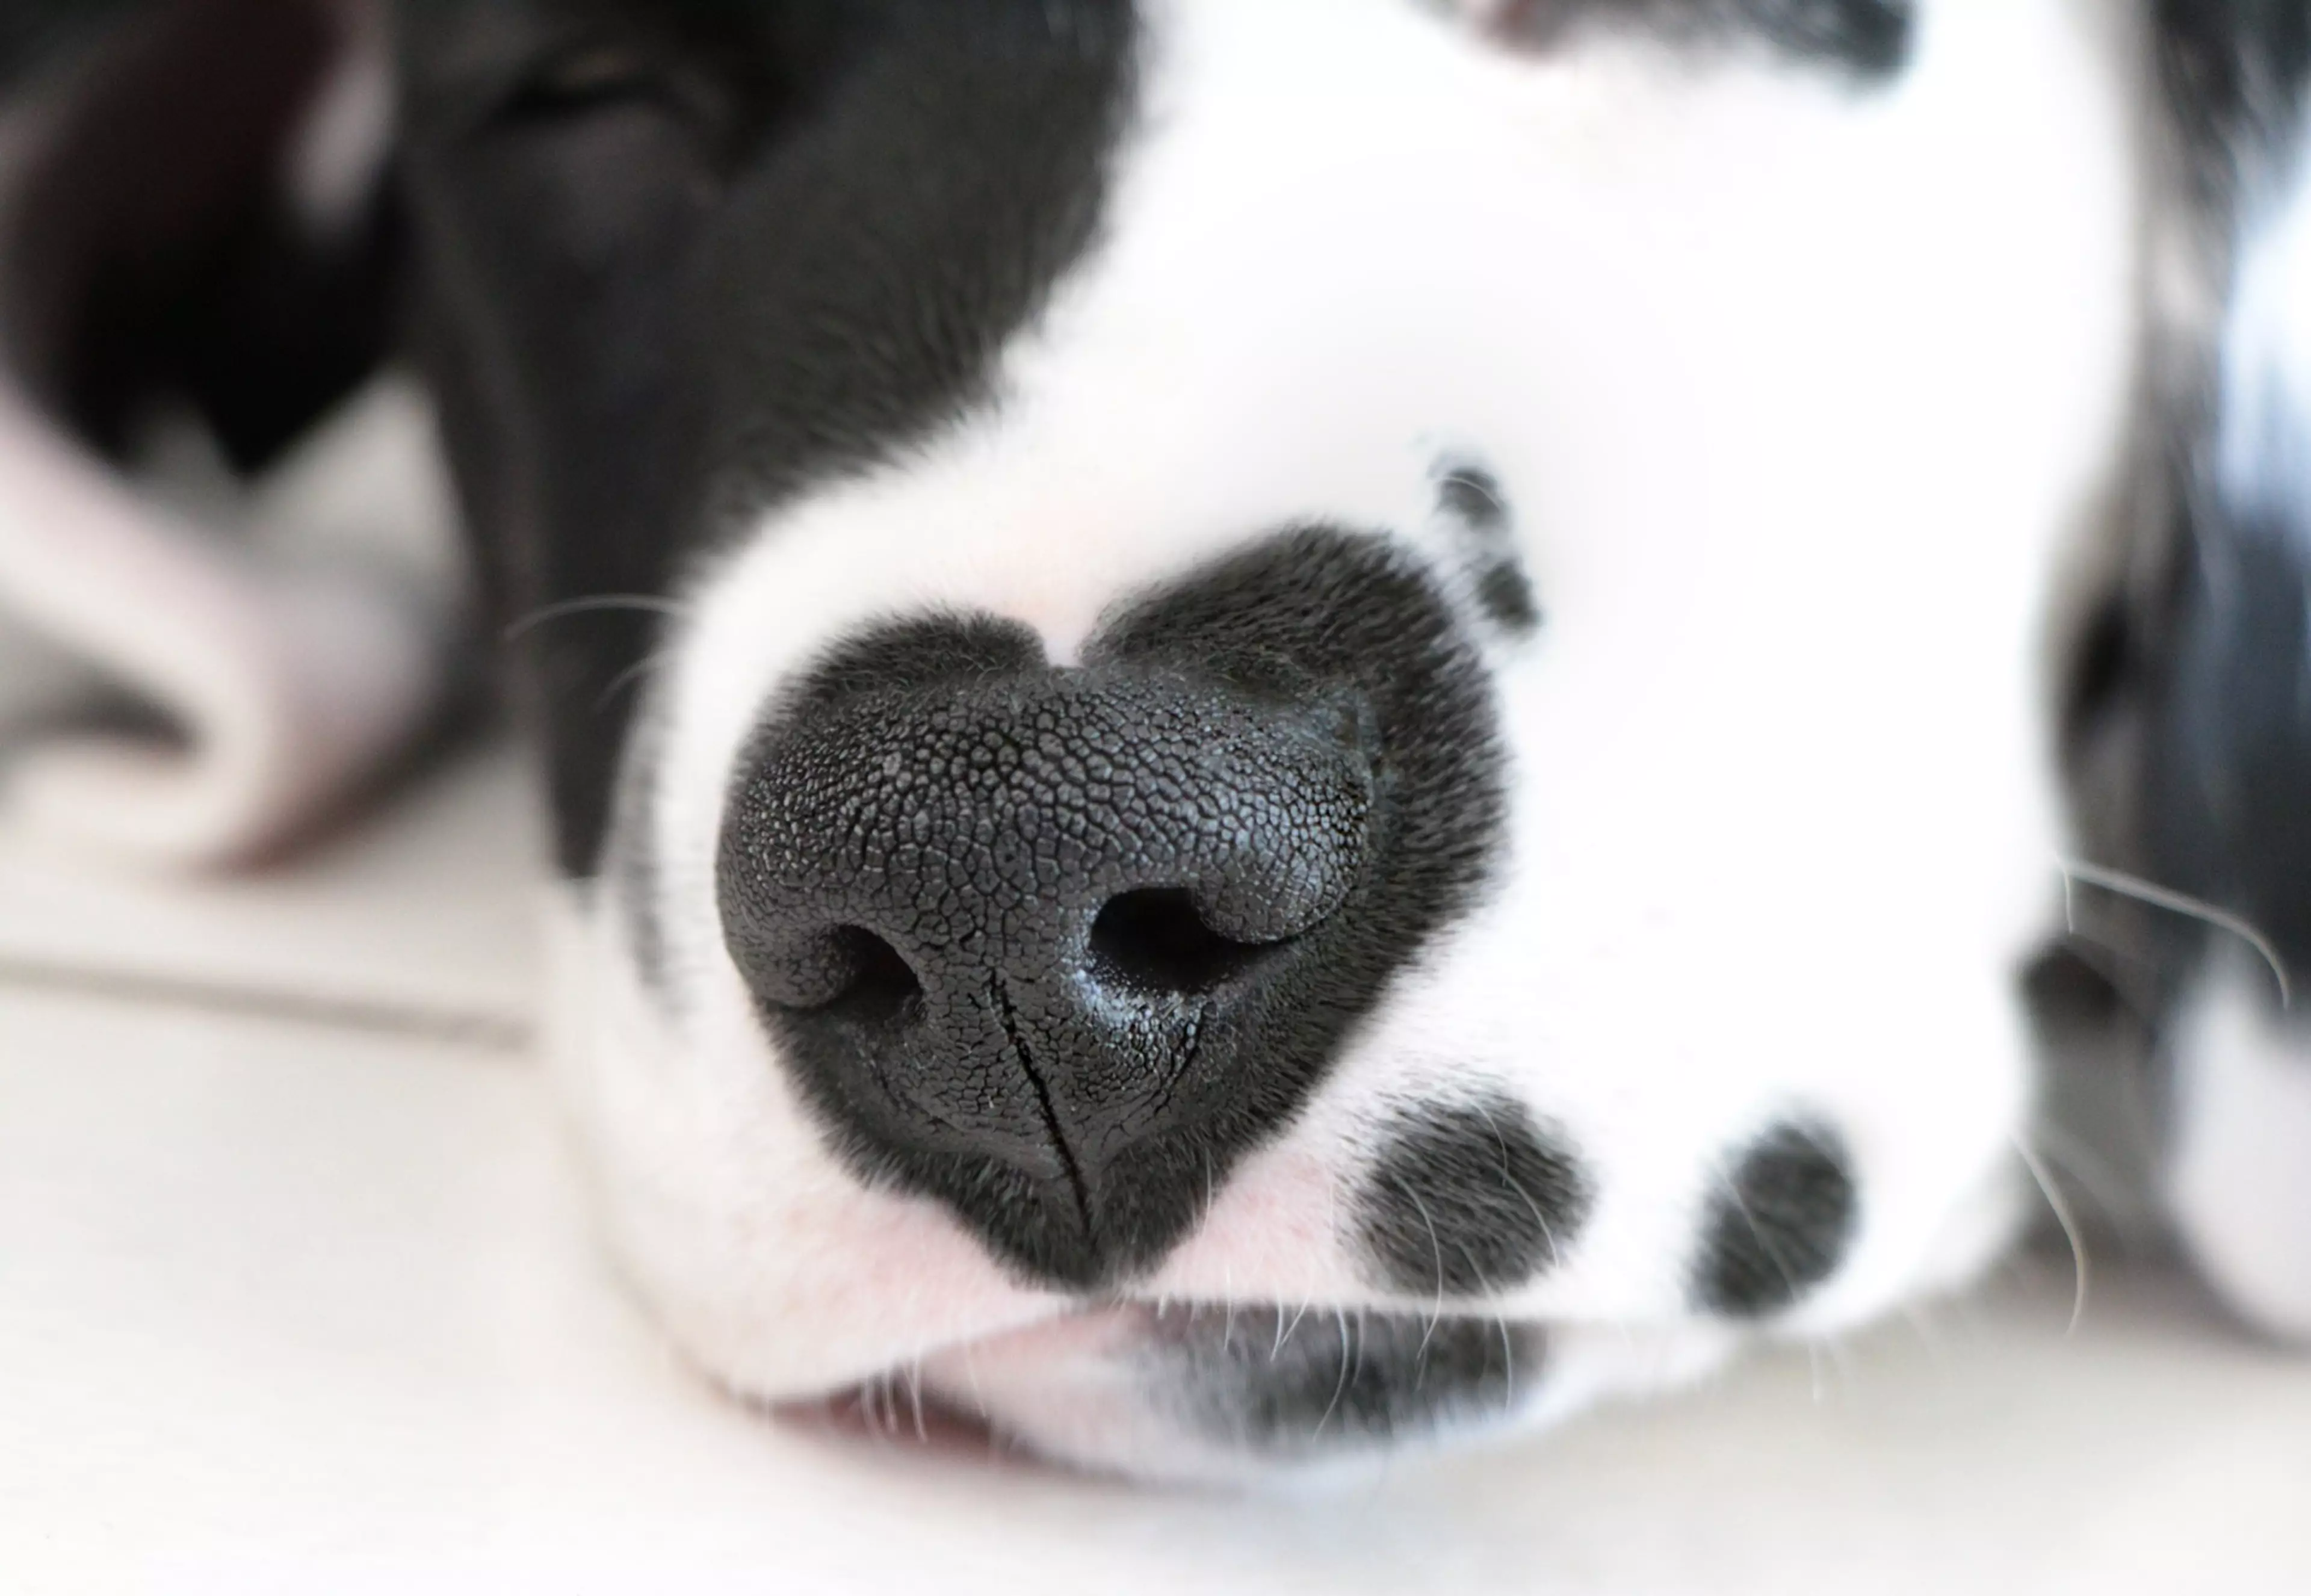 Rorschach's unique heart-shaped markings make him one of a kind (